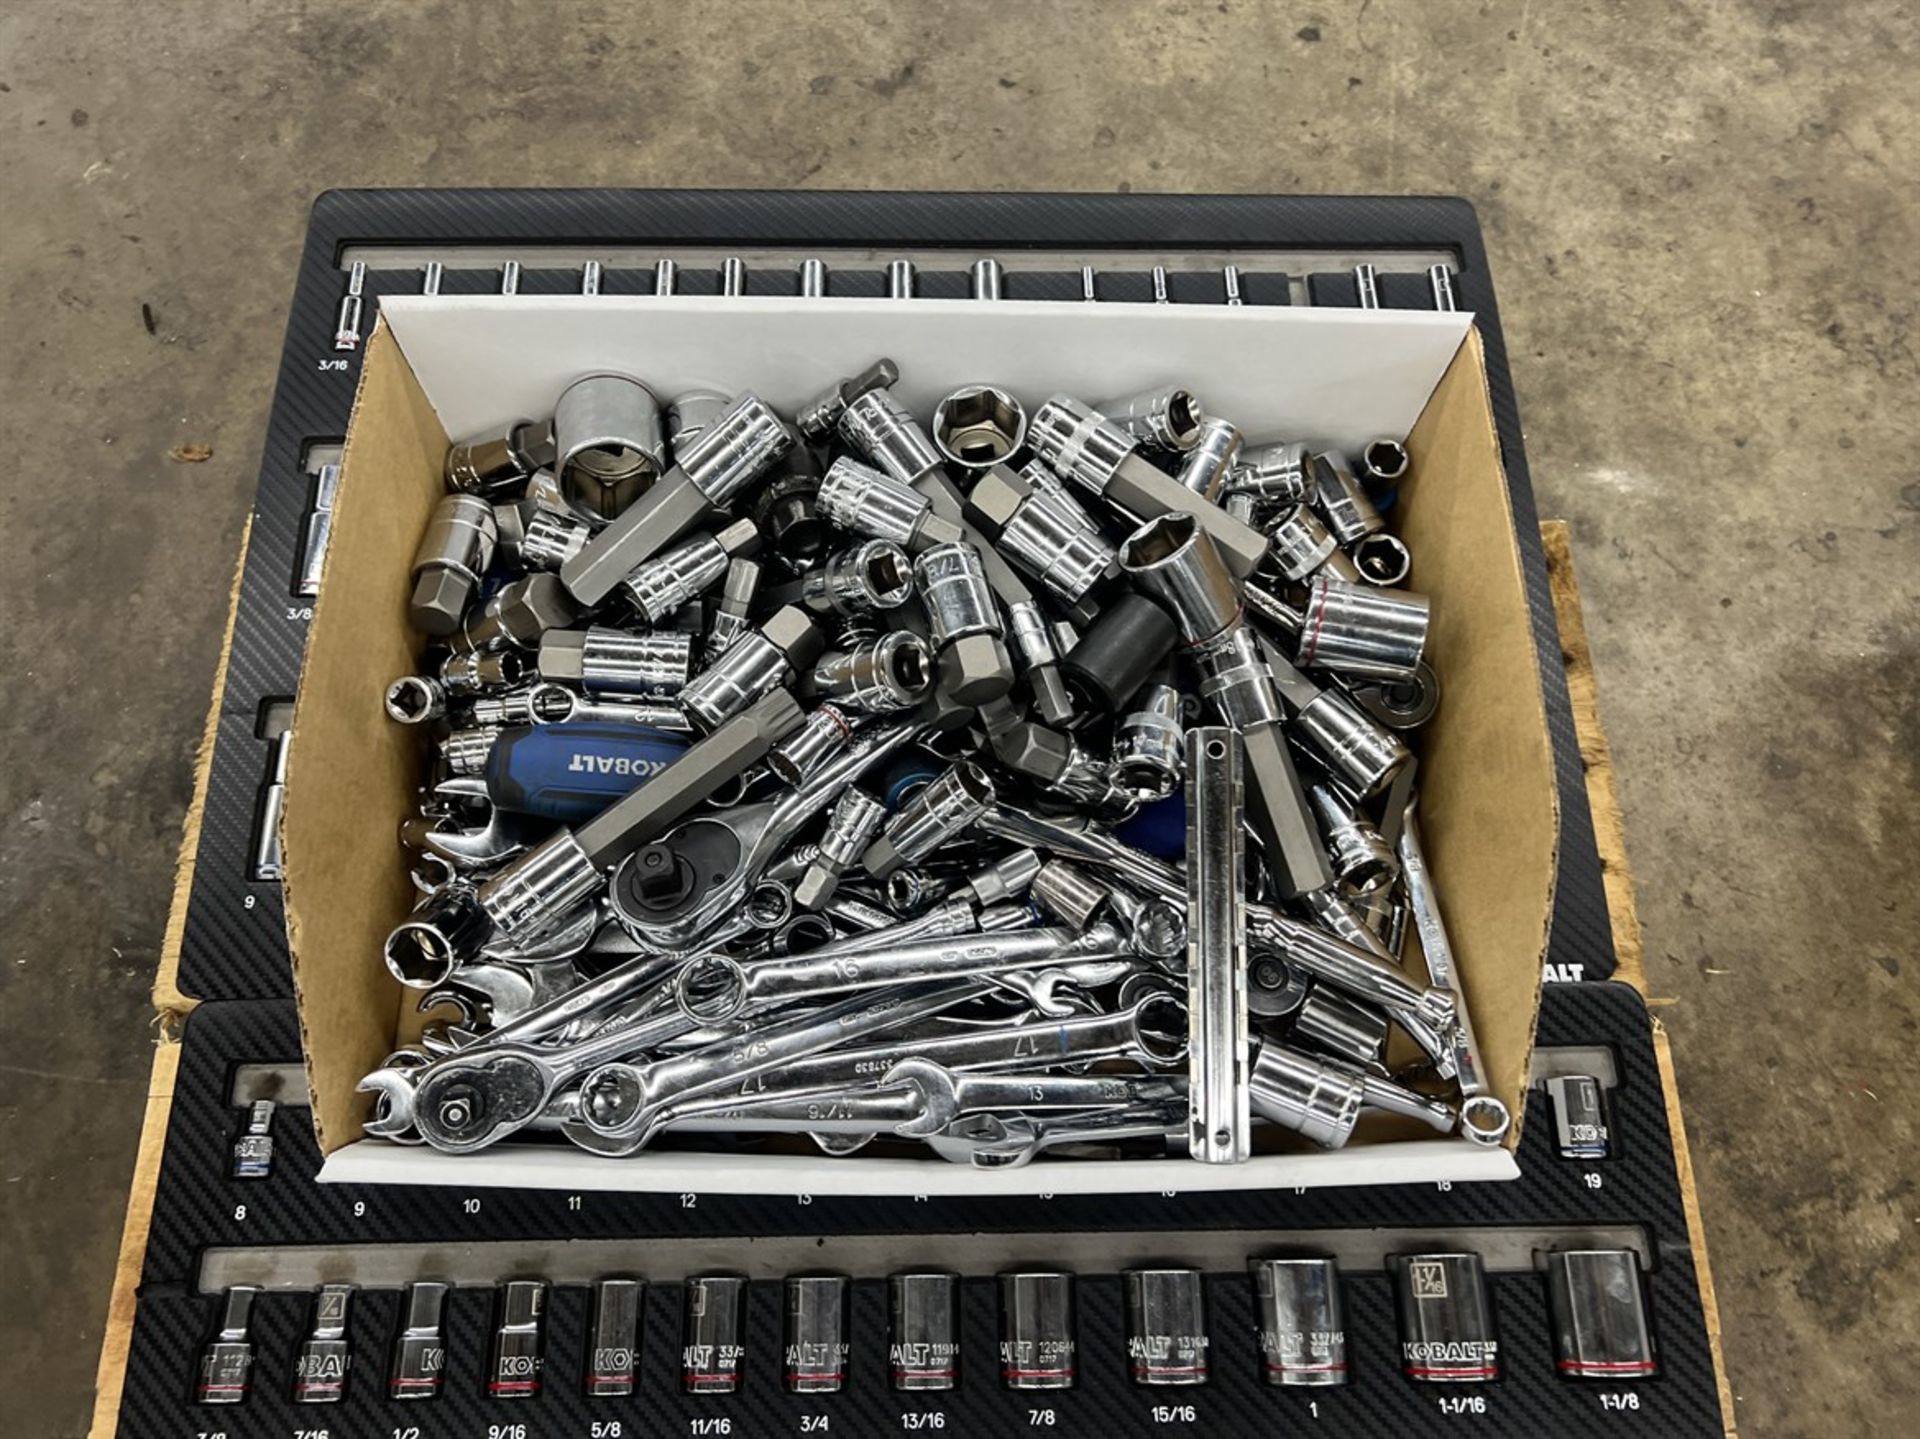 Lot of Sockets, Ratchets and Combinaton Wrenches - Image 3 of 3